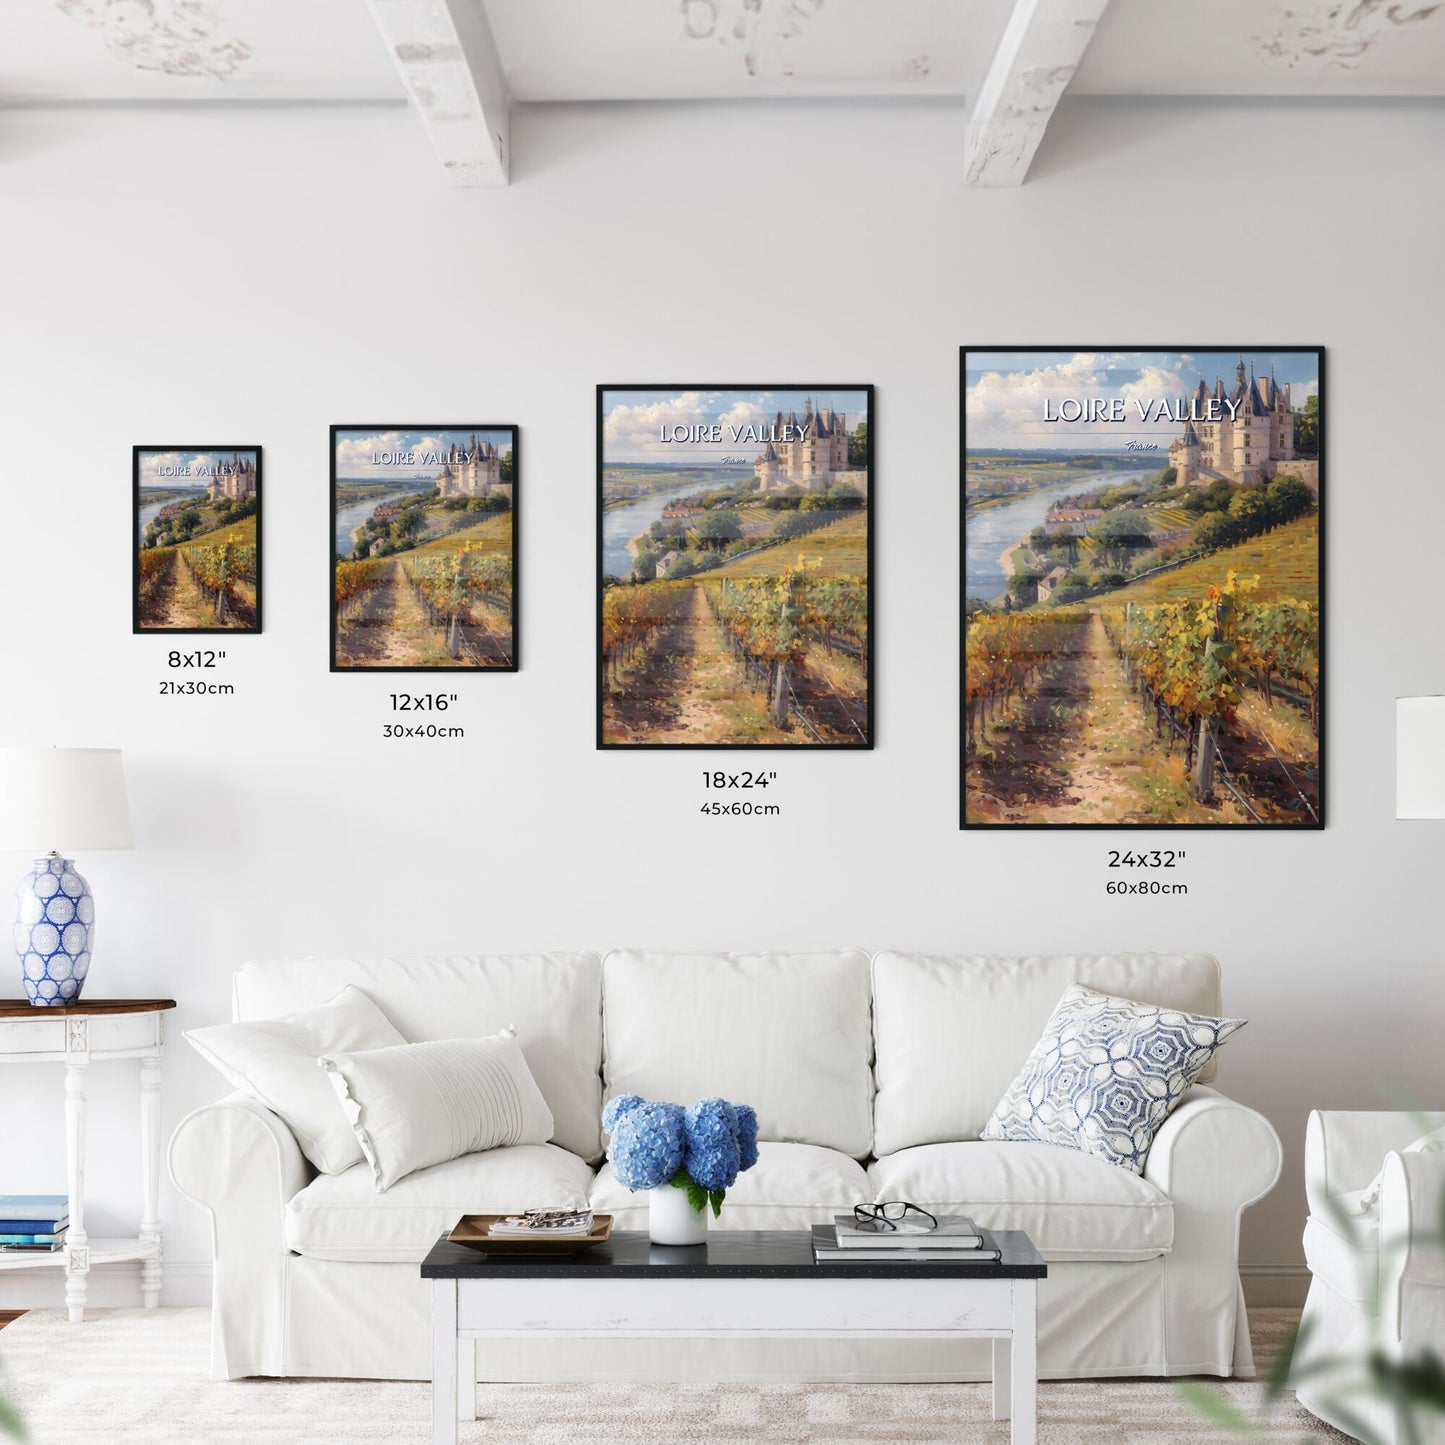 Loire Valley, France - Art print of a castle on a hill with a river and a vineyard Default Title